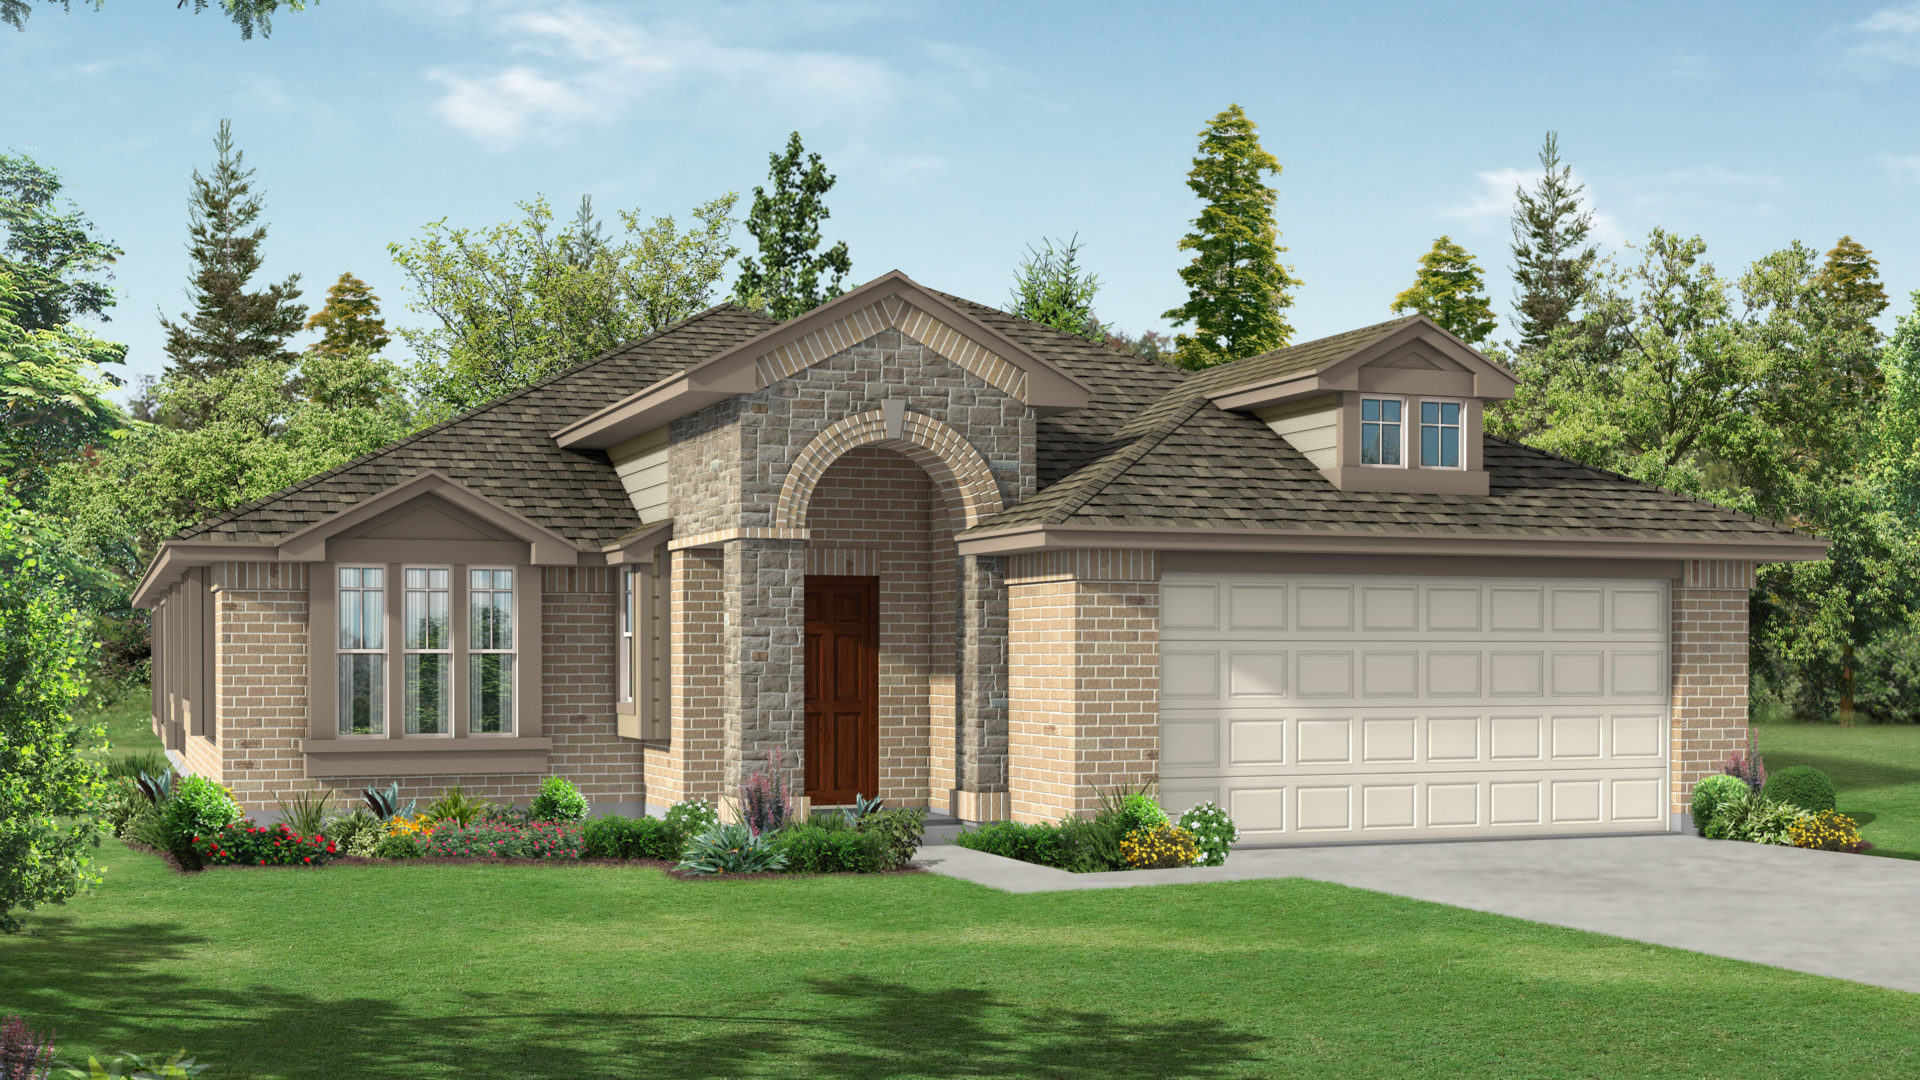 The Coral Cay Craftsman Series Elevation A Crosswinds New Homes in Kyle